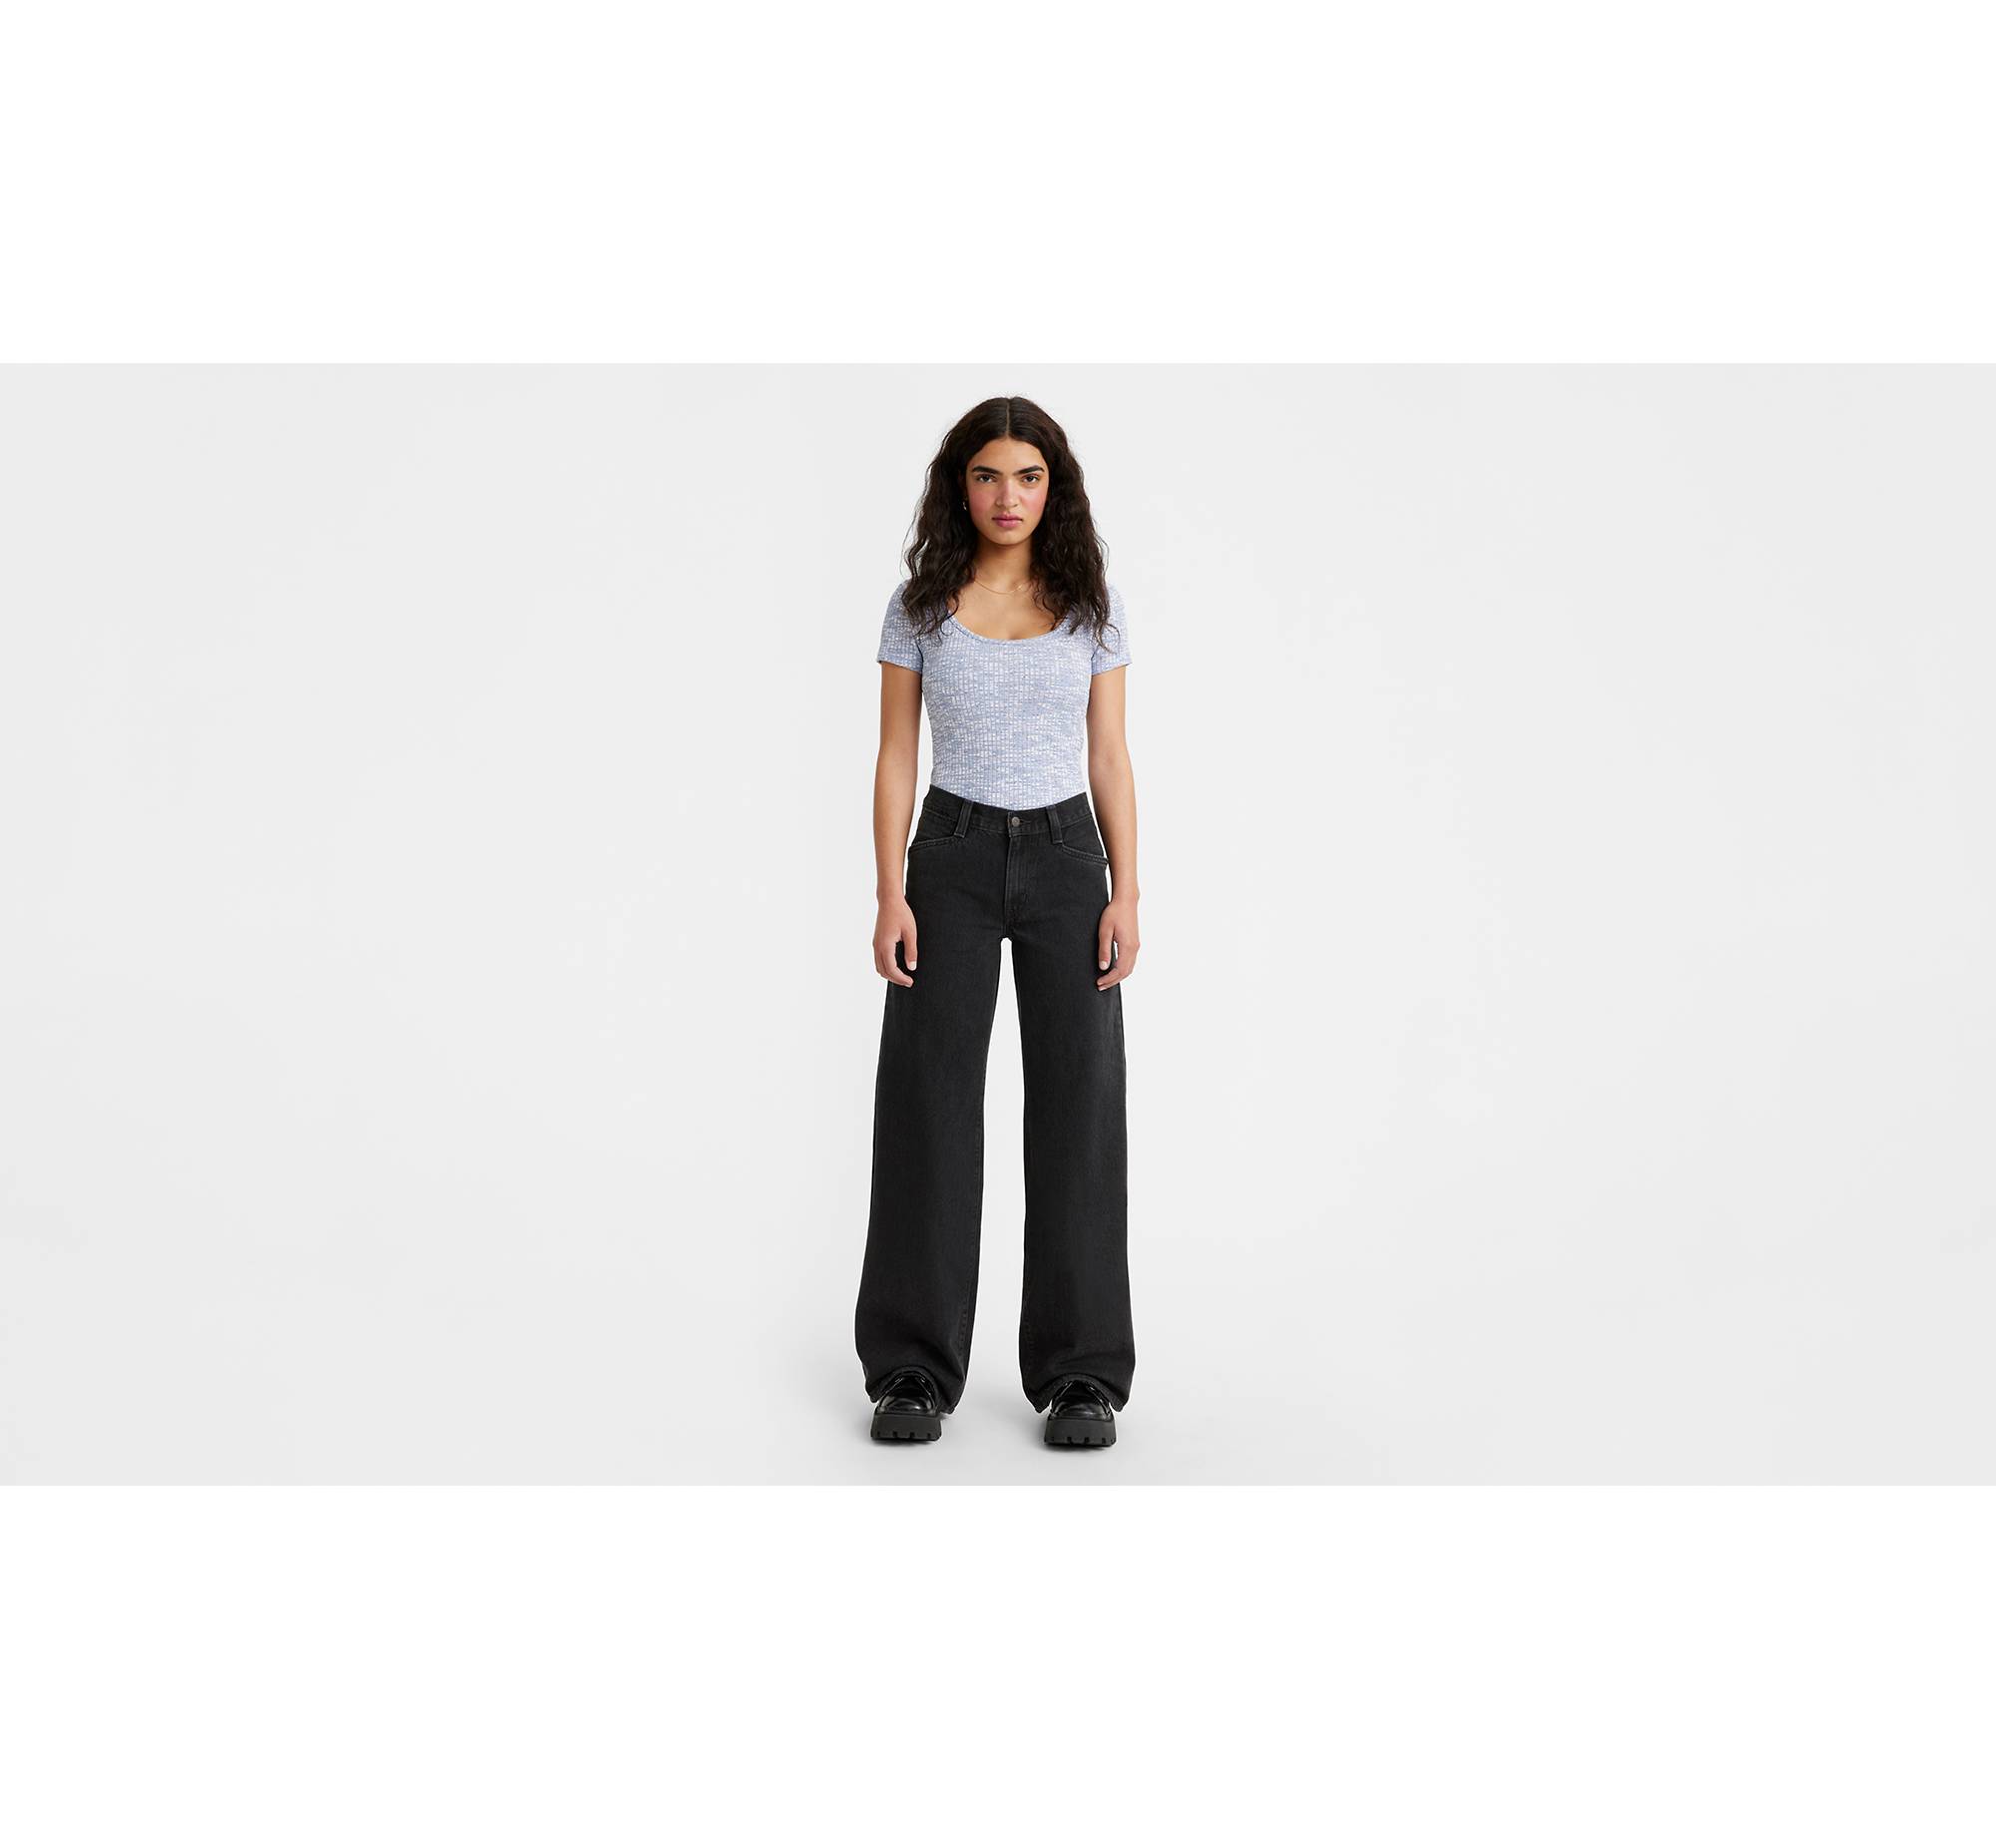 RSQ Womens Jeans in Womens Jeans